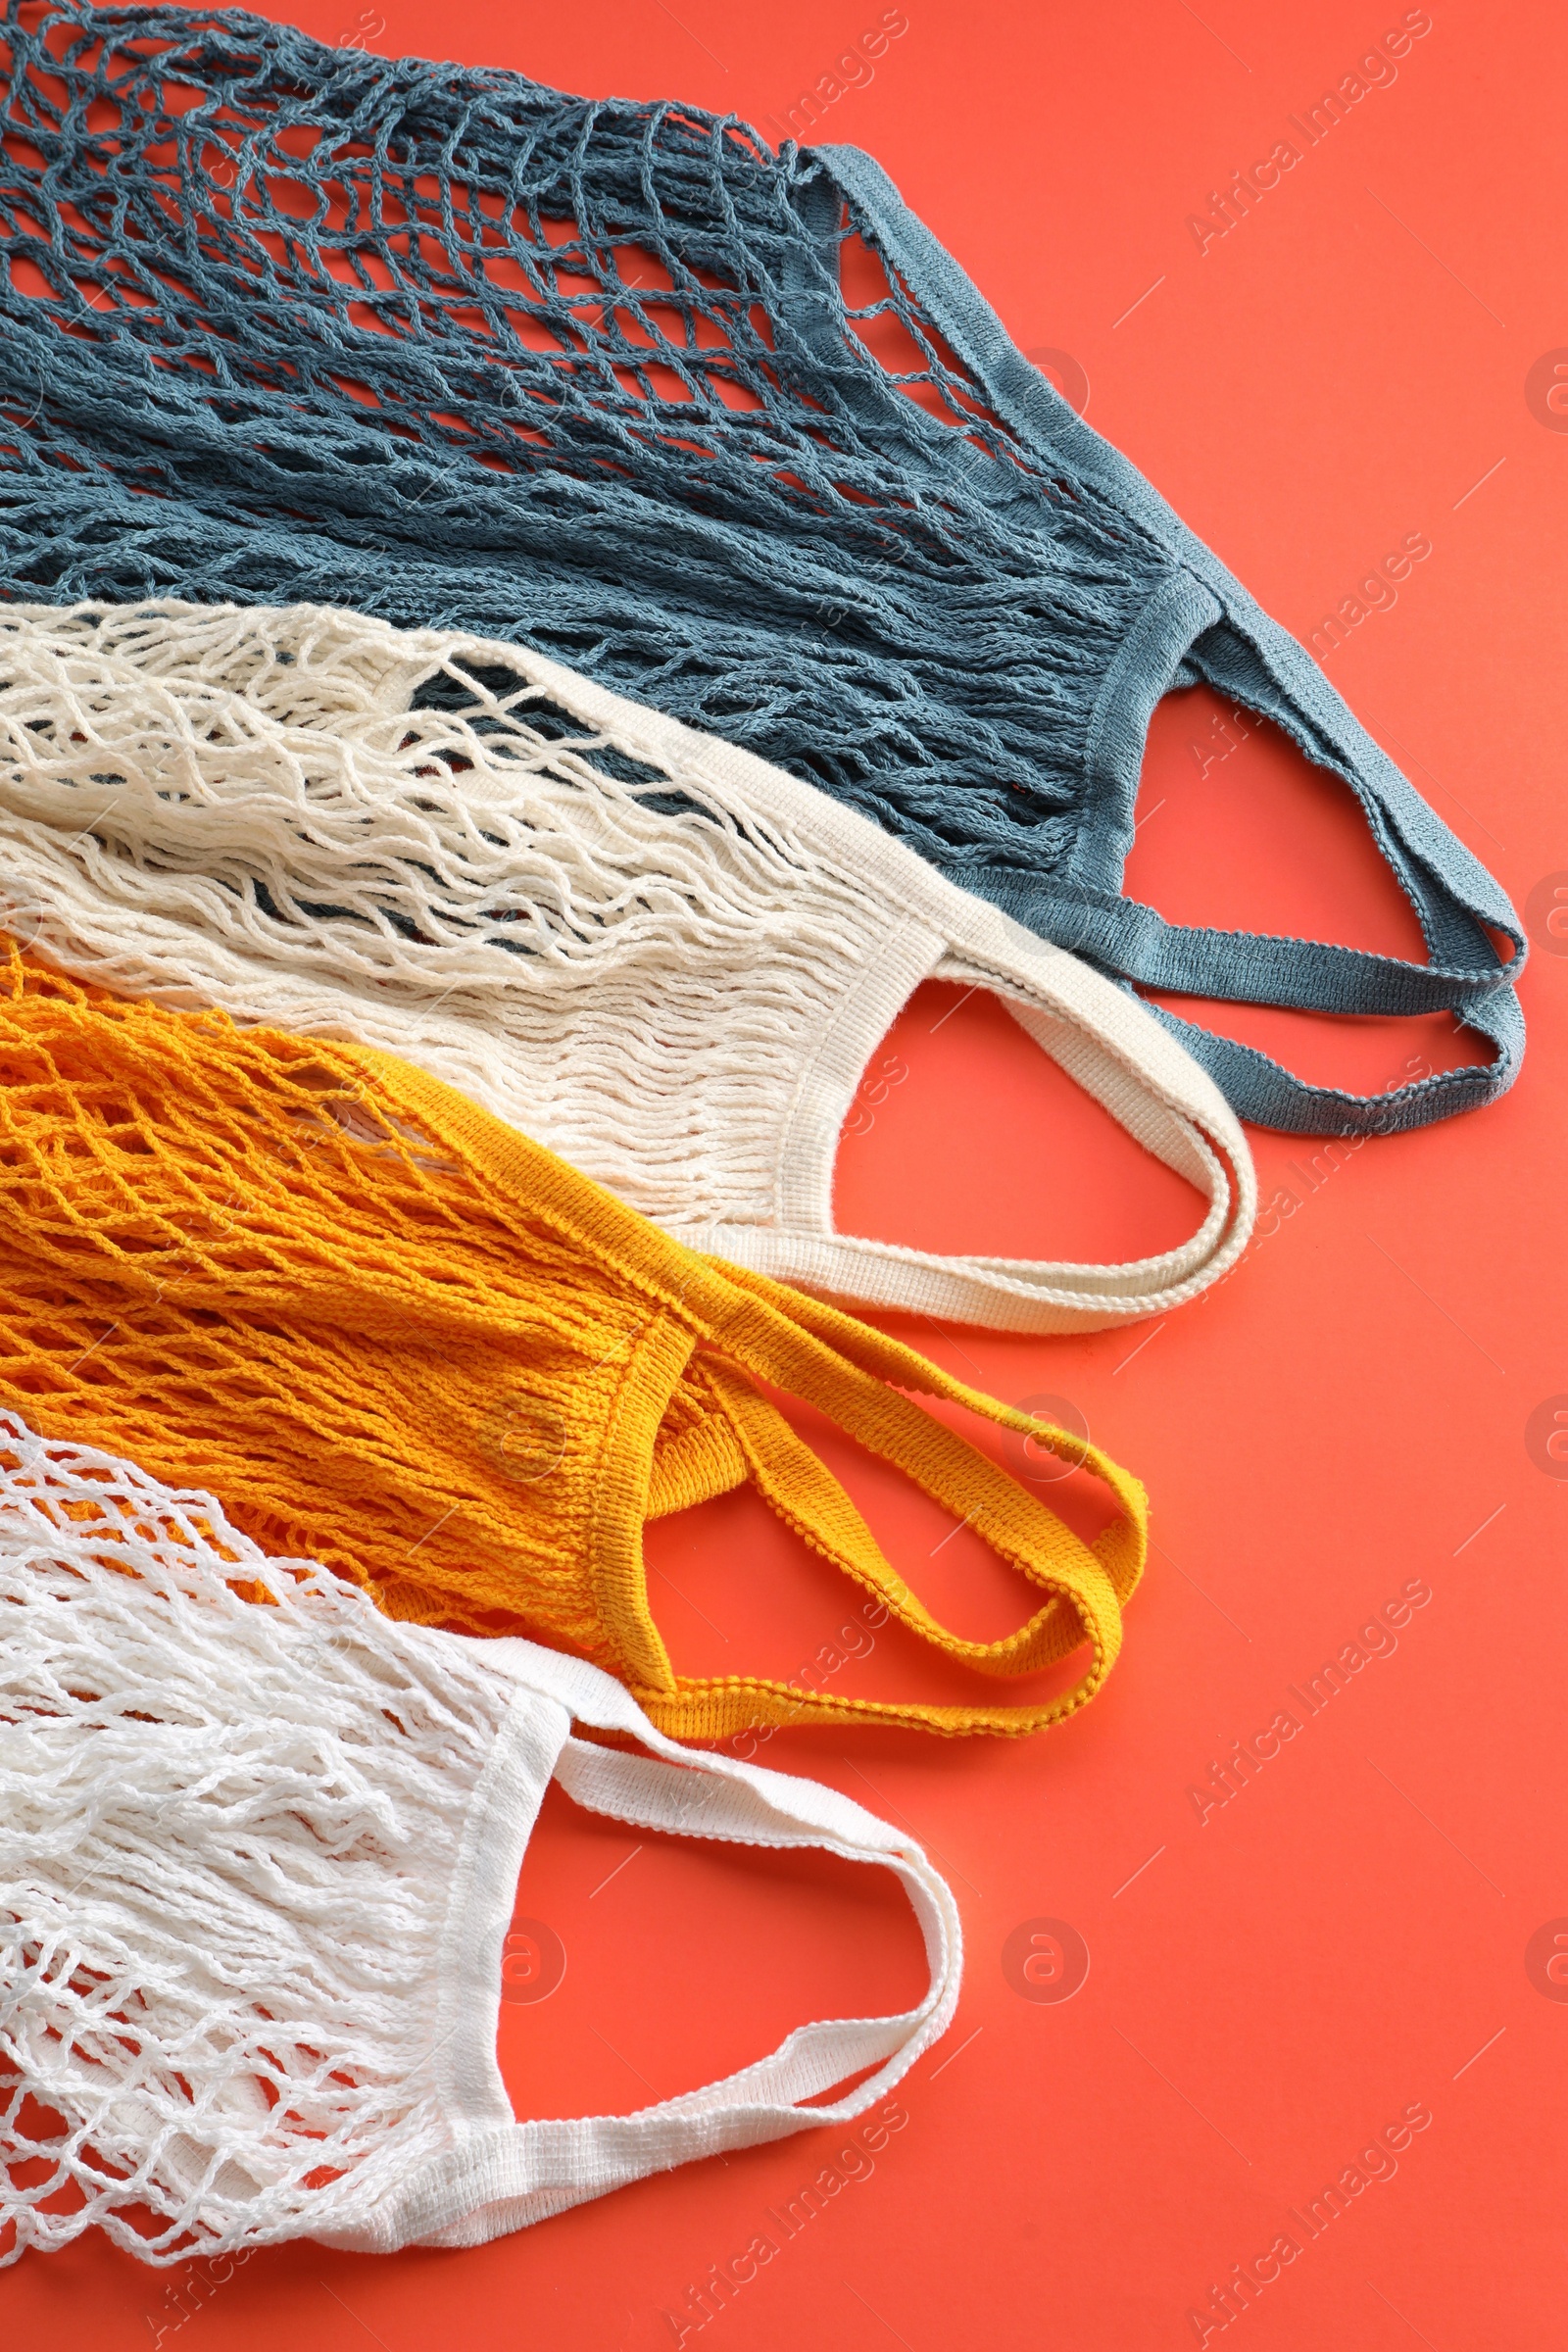 Photo of Different string bags on red background, top view